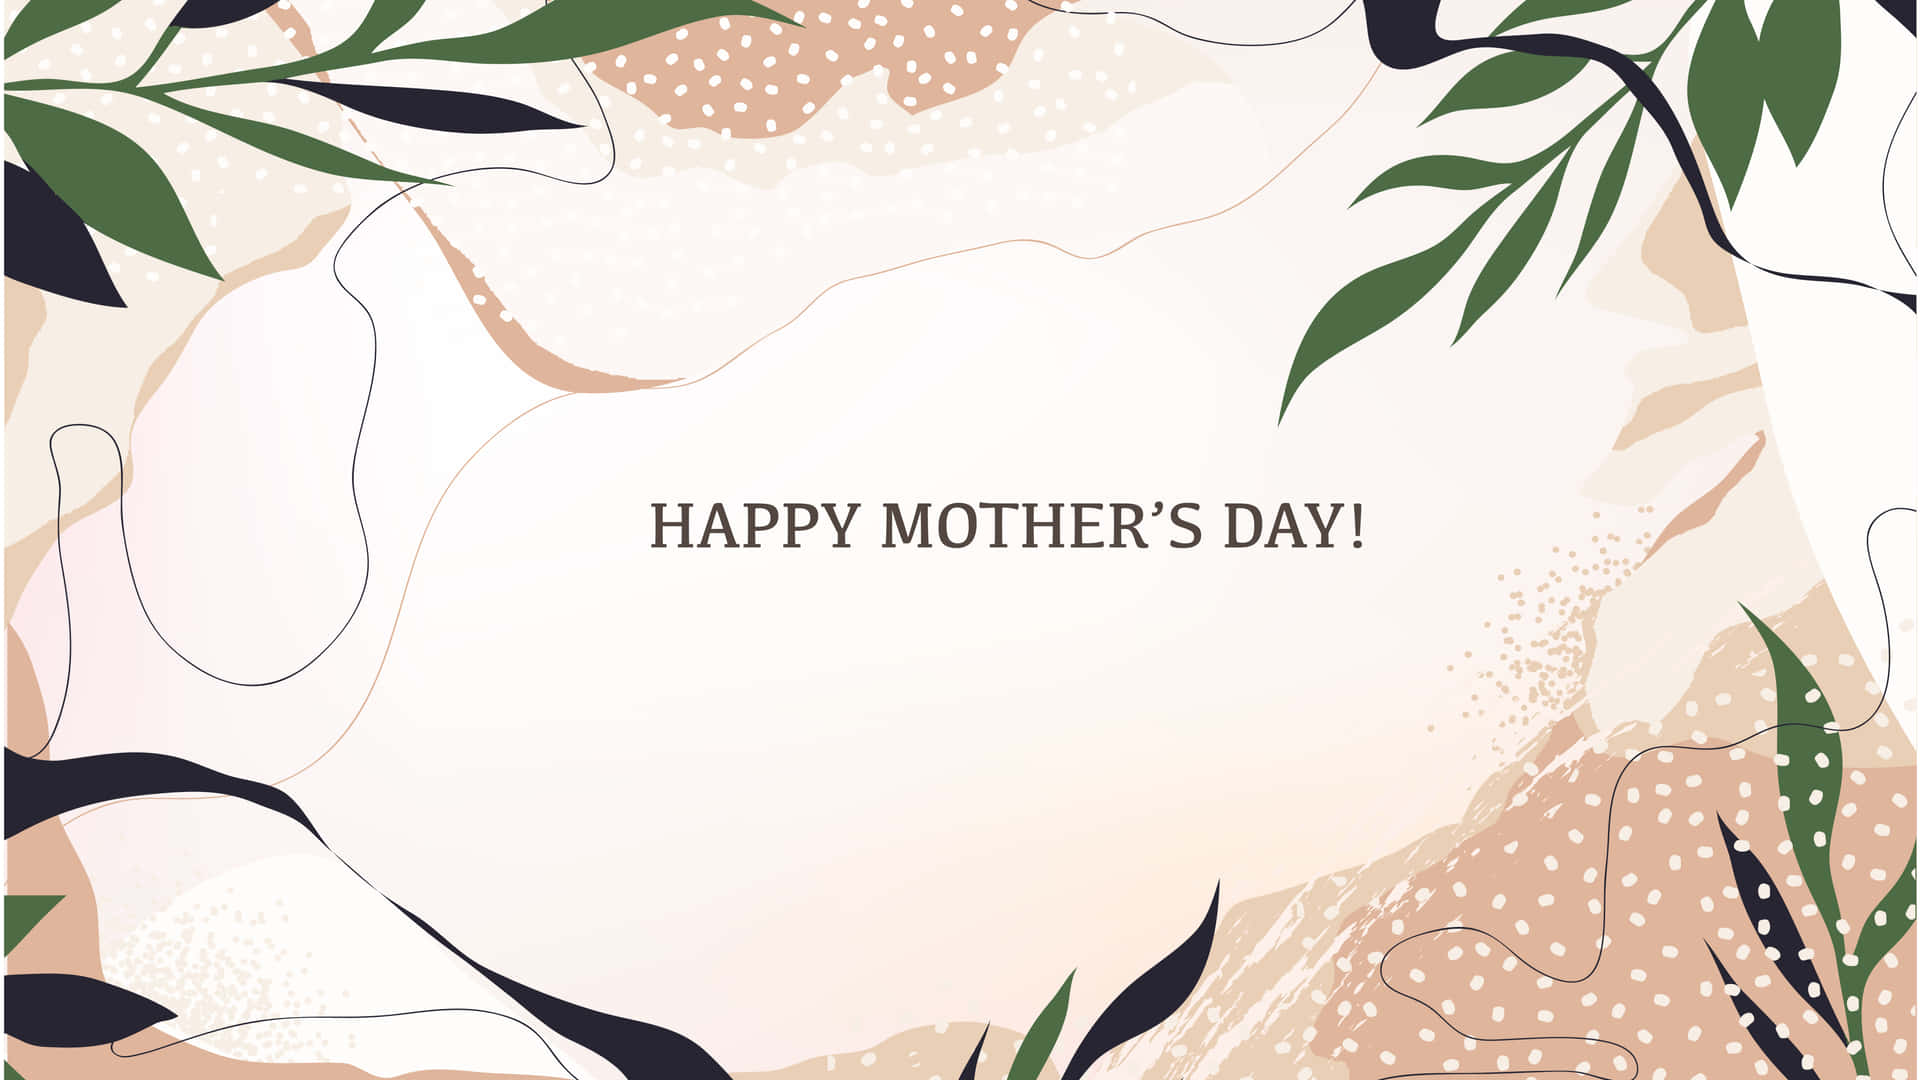 Happy Mother's Day Card With Leaves And Flowers